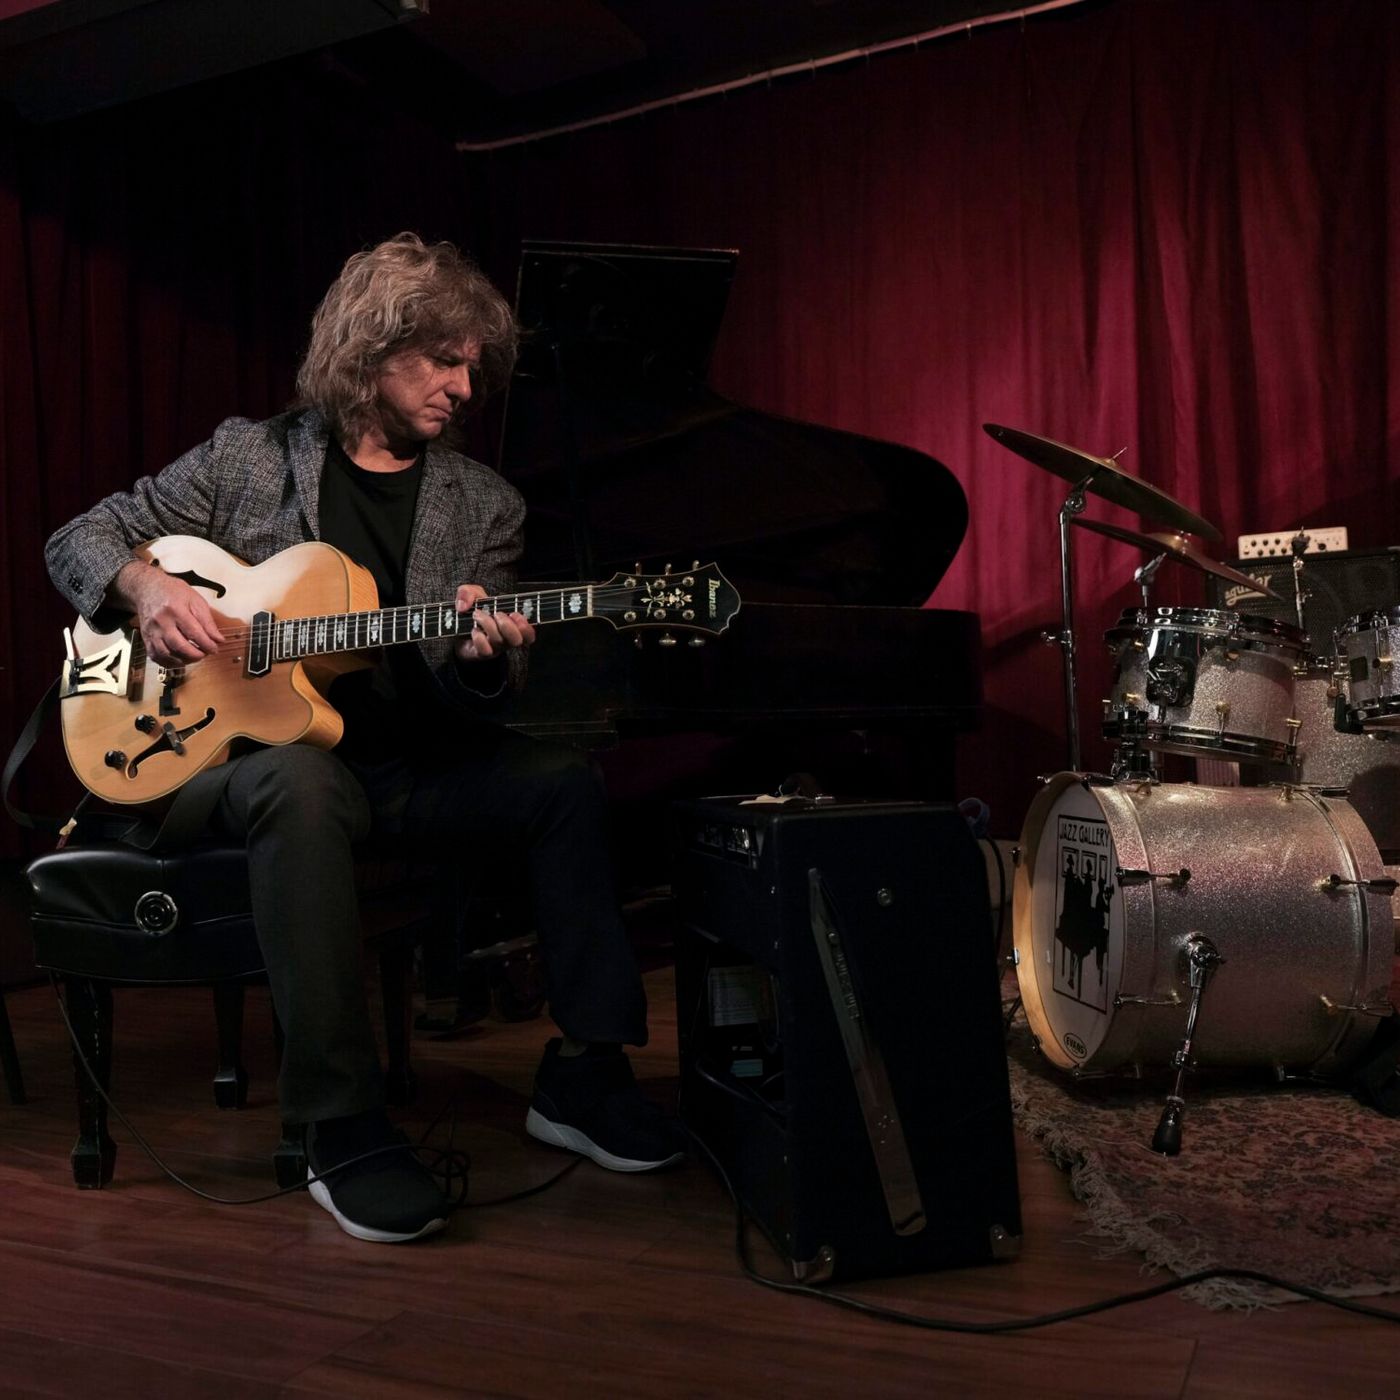 Pat Metheny in conversation with David Sanborn-Part 1: his history, influences, & the creative process